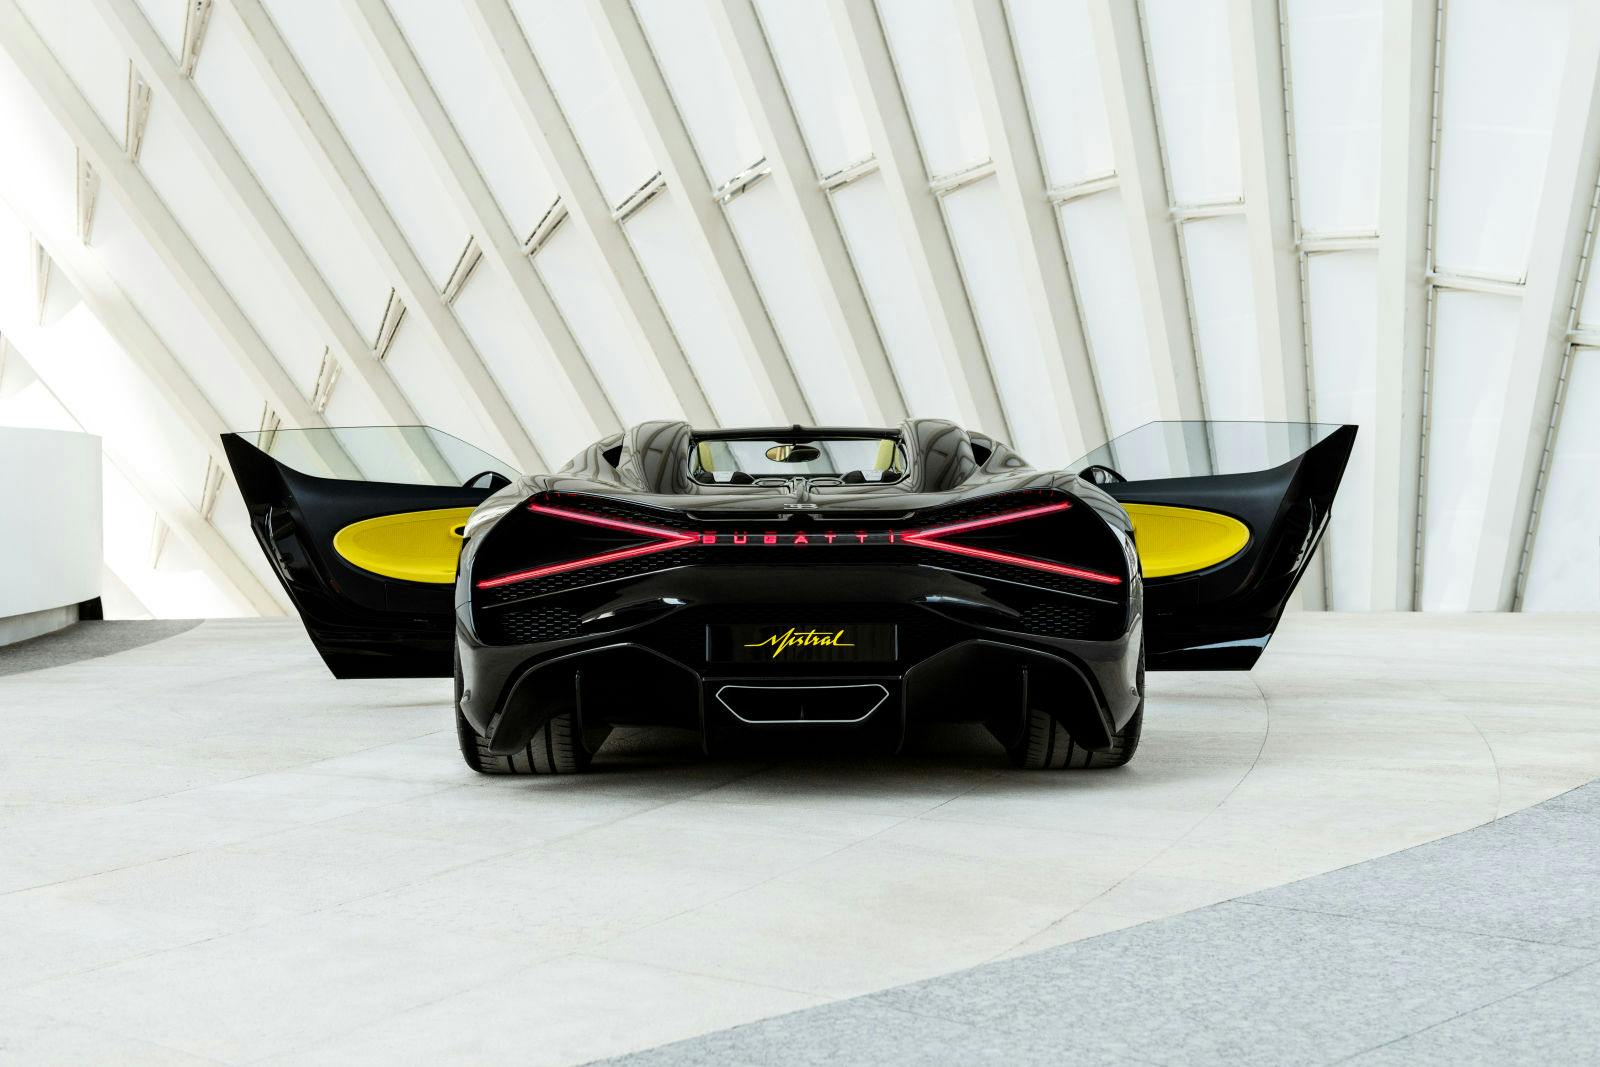 For its tour in Saudi Arabia, Bugatti W16 Mistral’s first stop was the King Abdullah Financial District.